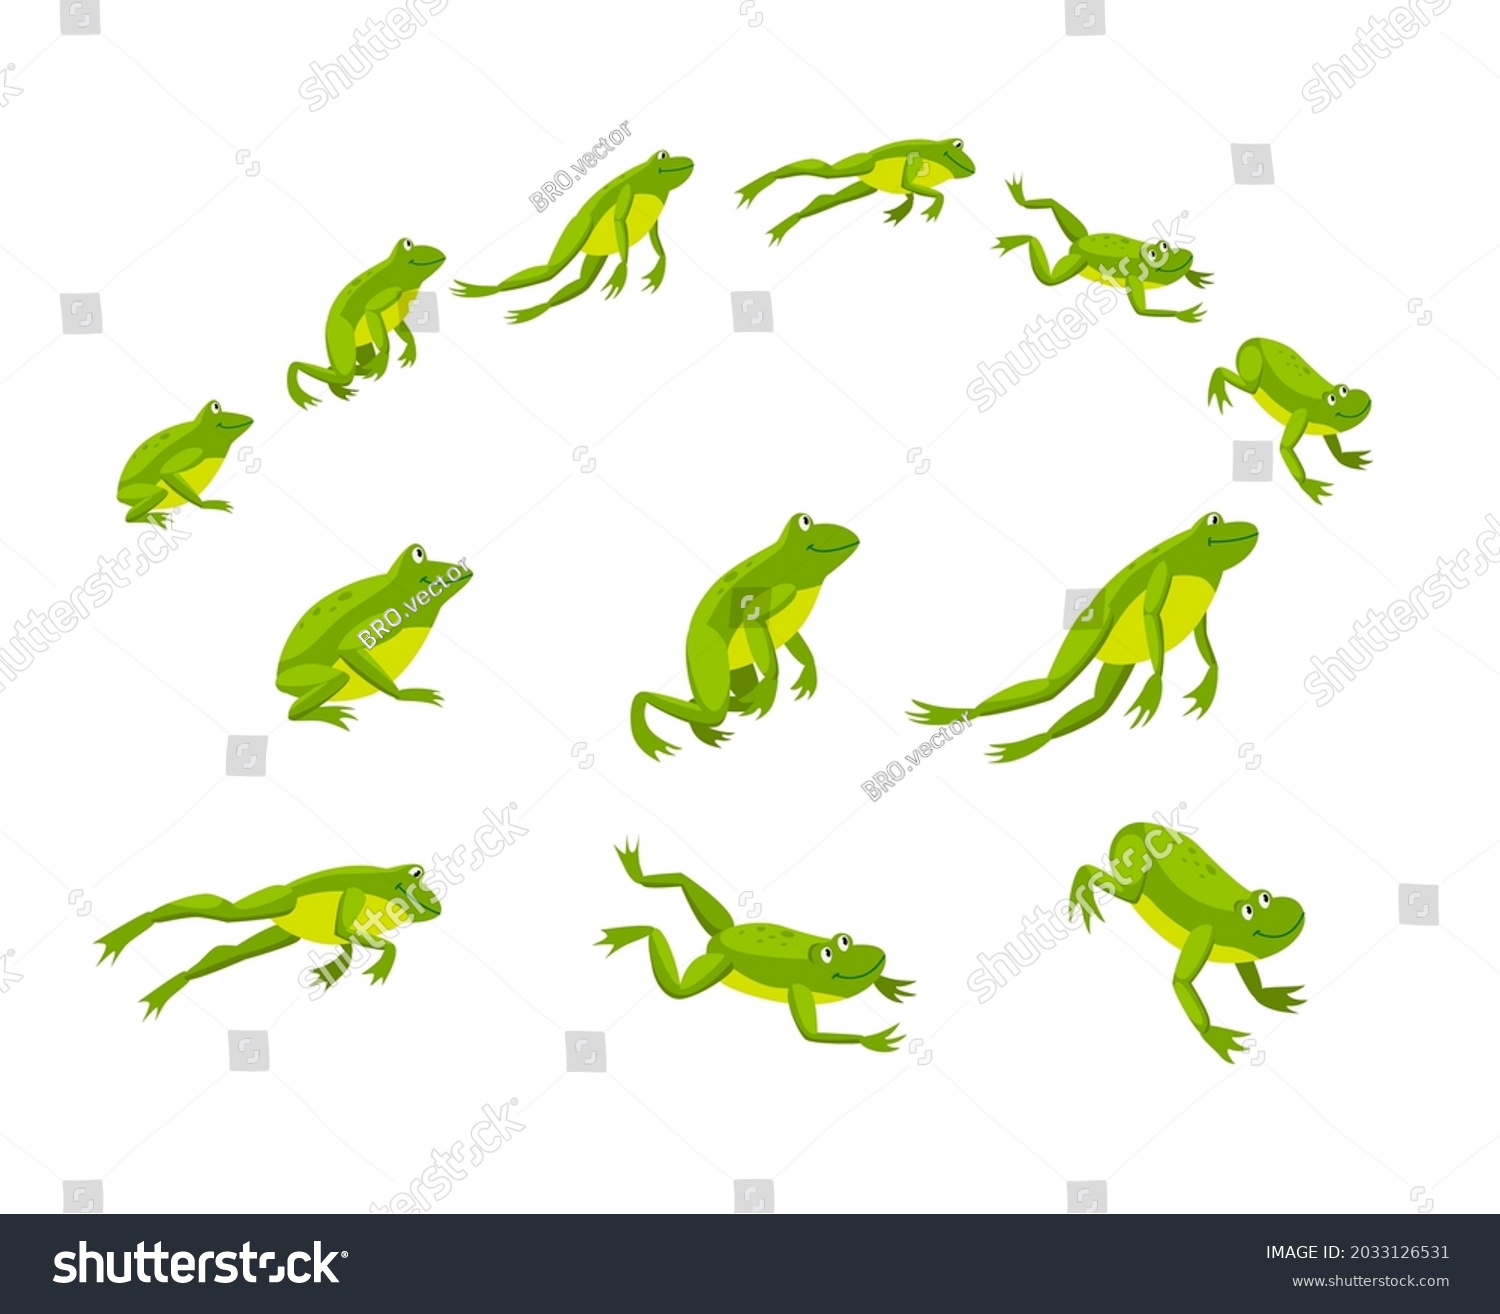 SVG of Set of green frogs jumping in sequence. Cartoon vector illustration. Leaping toads on white background. Animated funny water animals. Nature, movement, amphibia, reptile, fauna concept for design svg